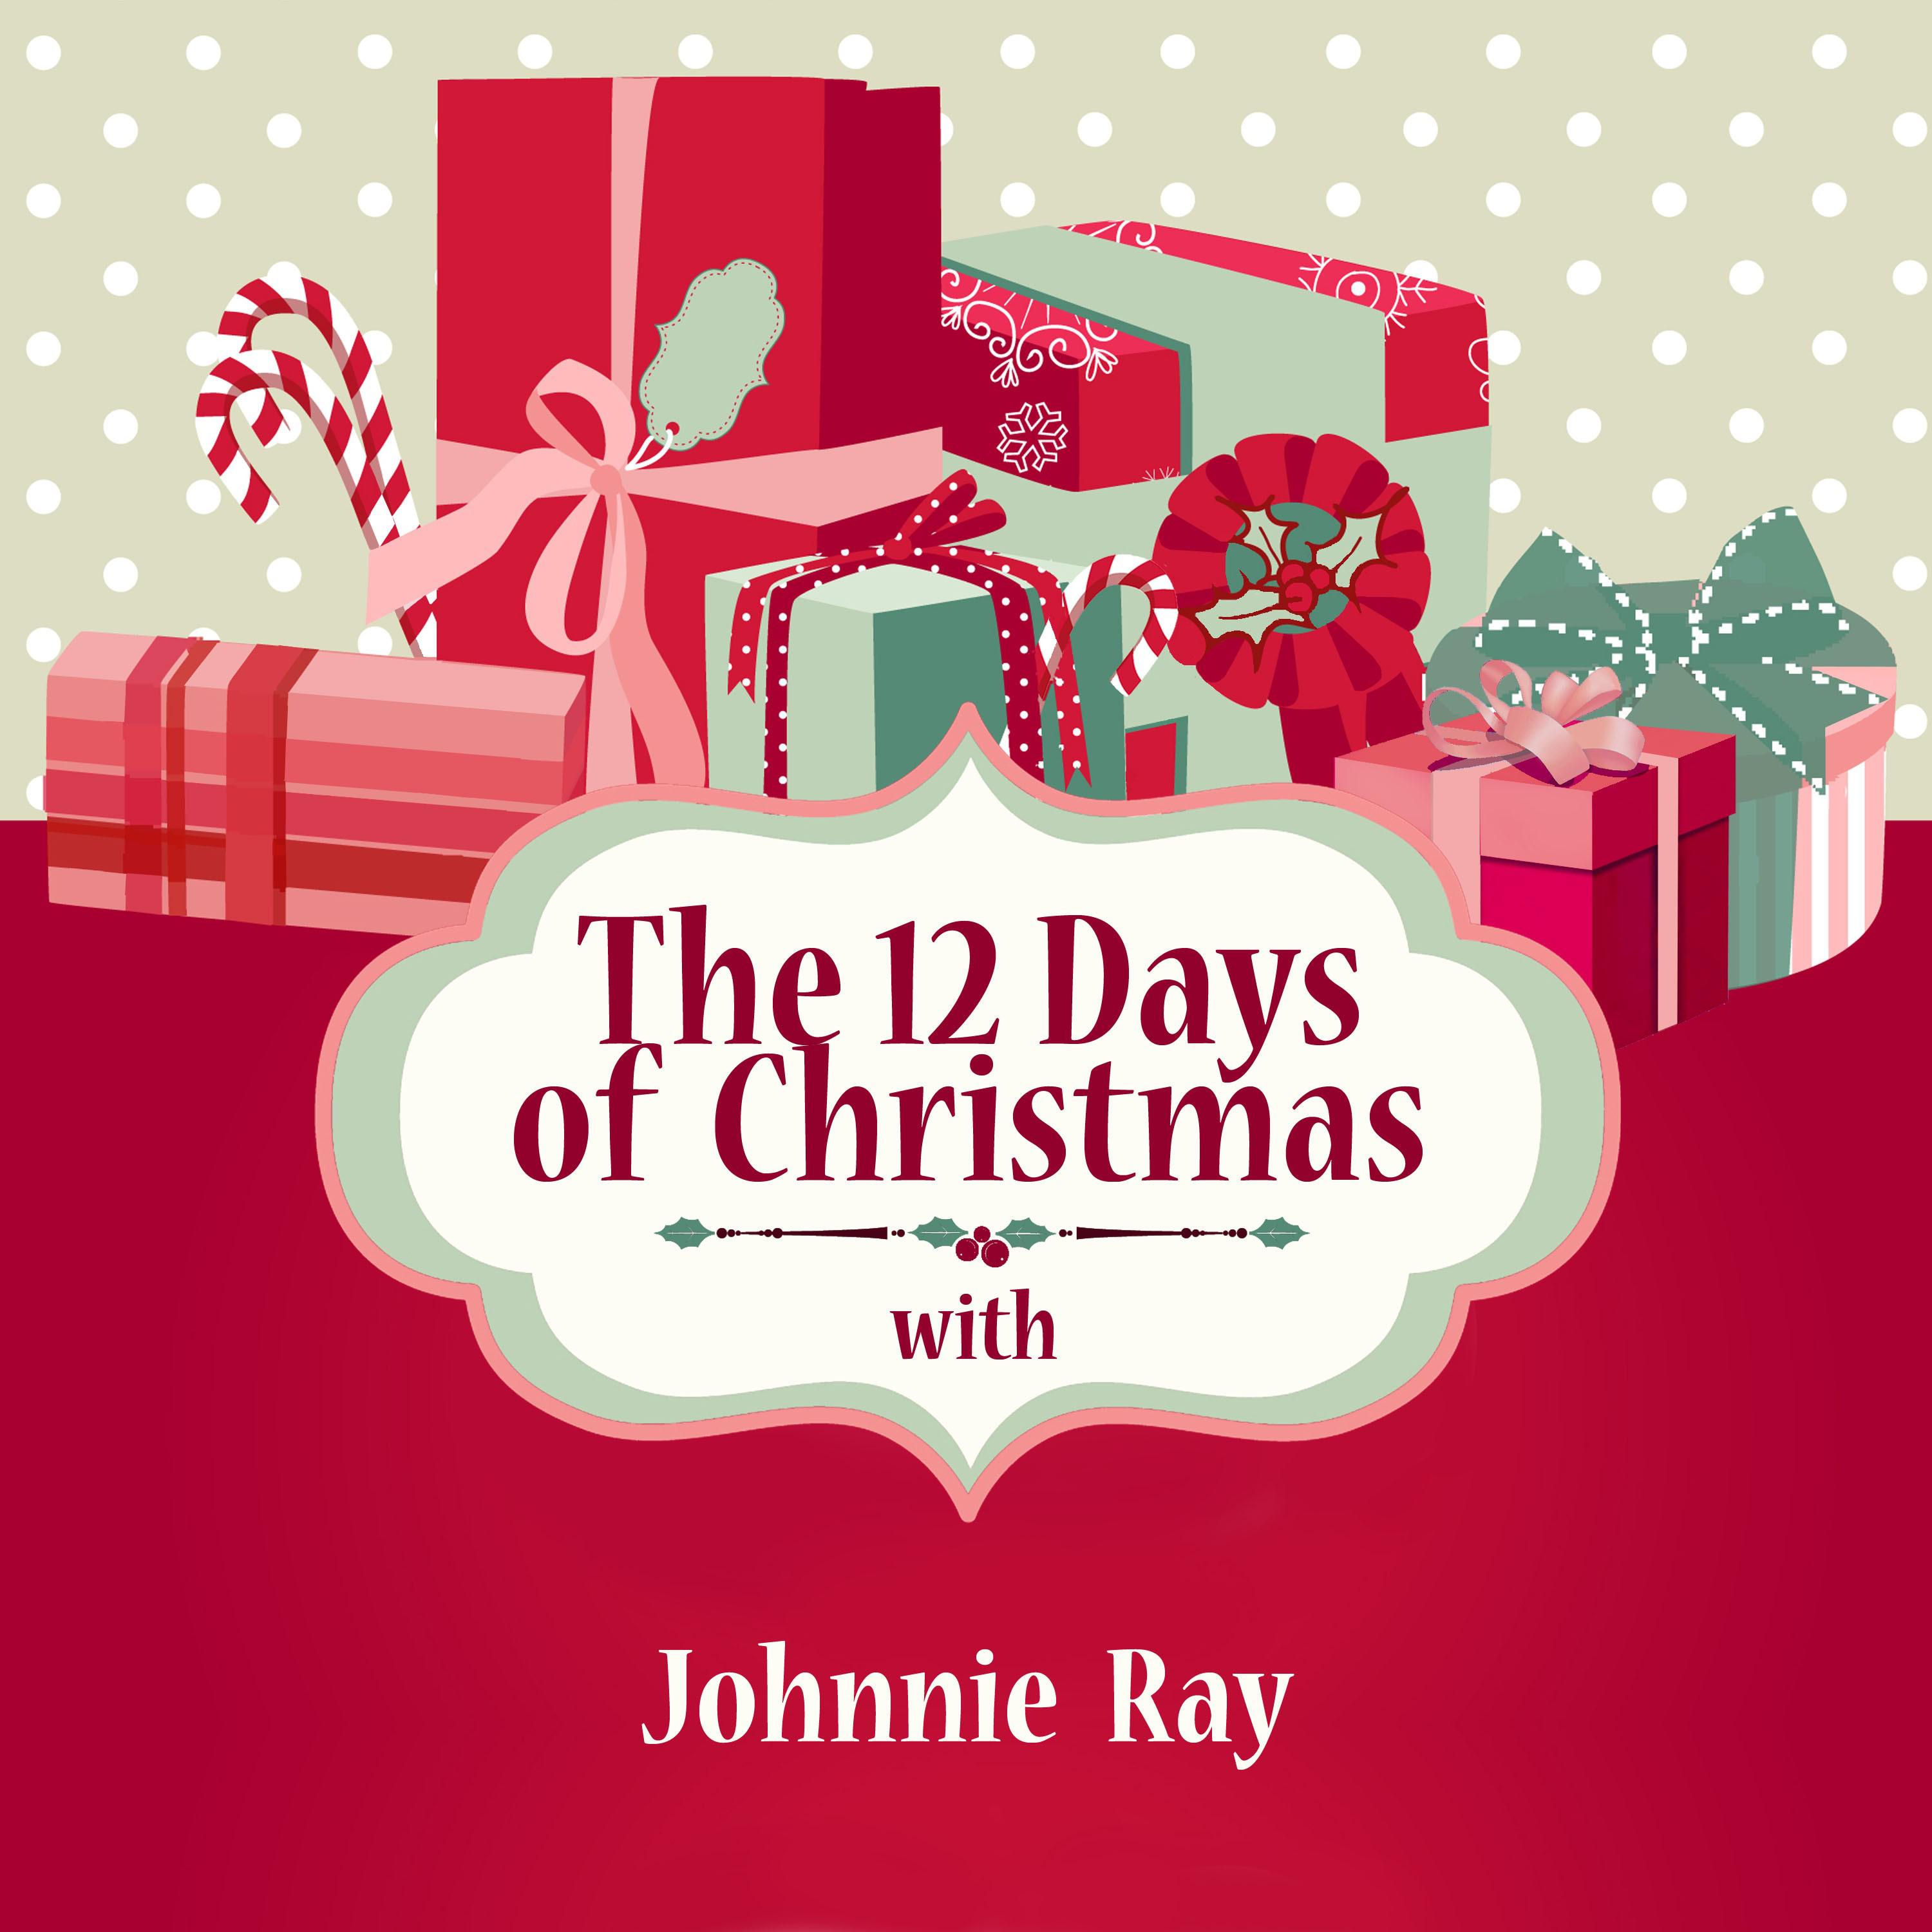 The 12 Days of Christmas with Johnnie Ray